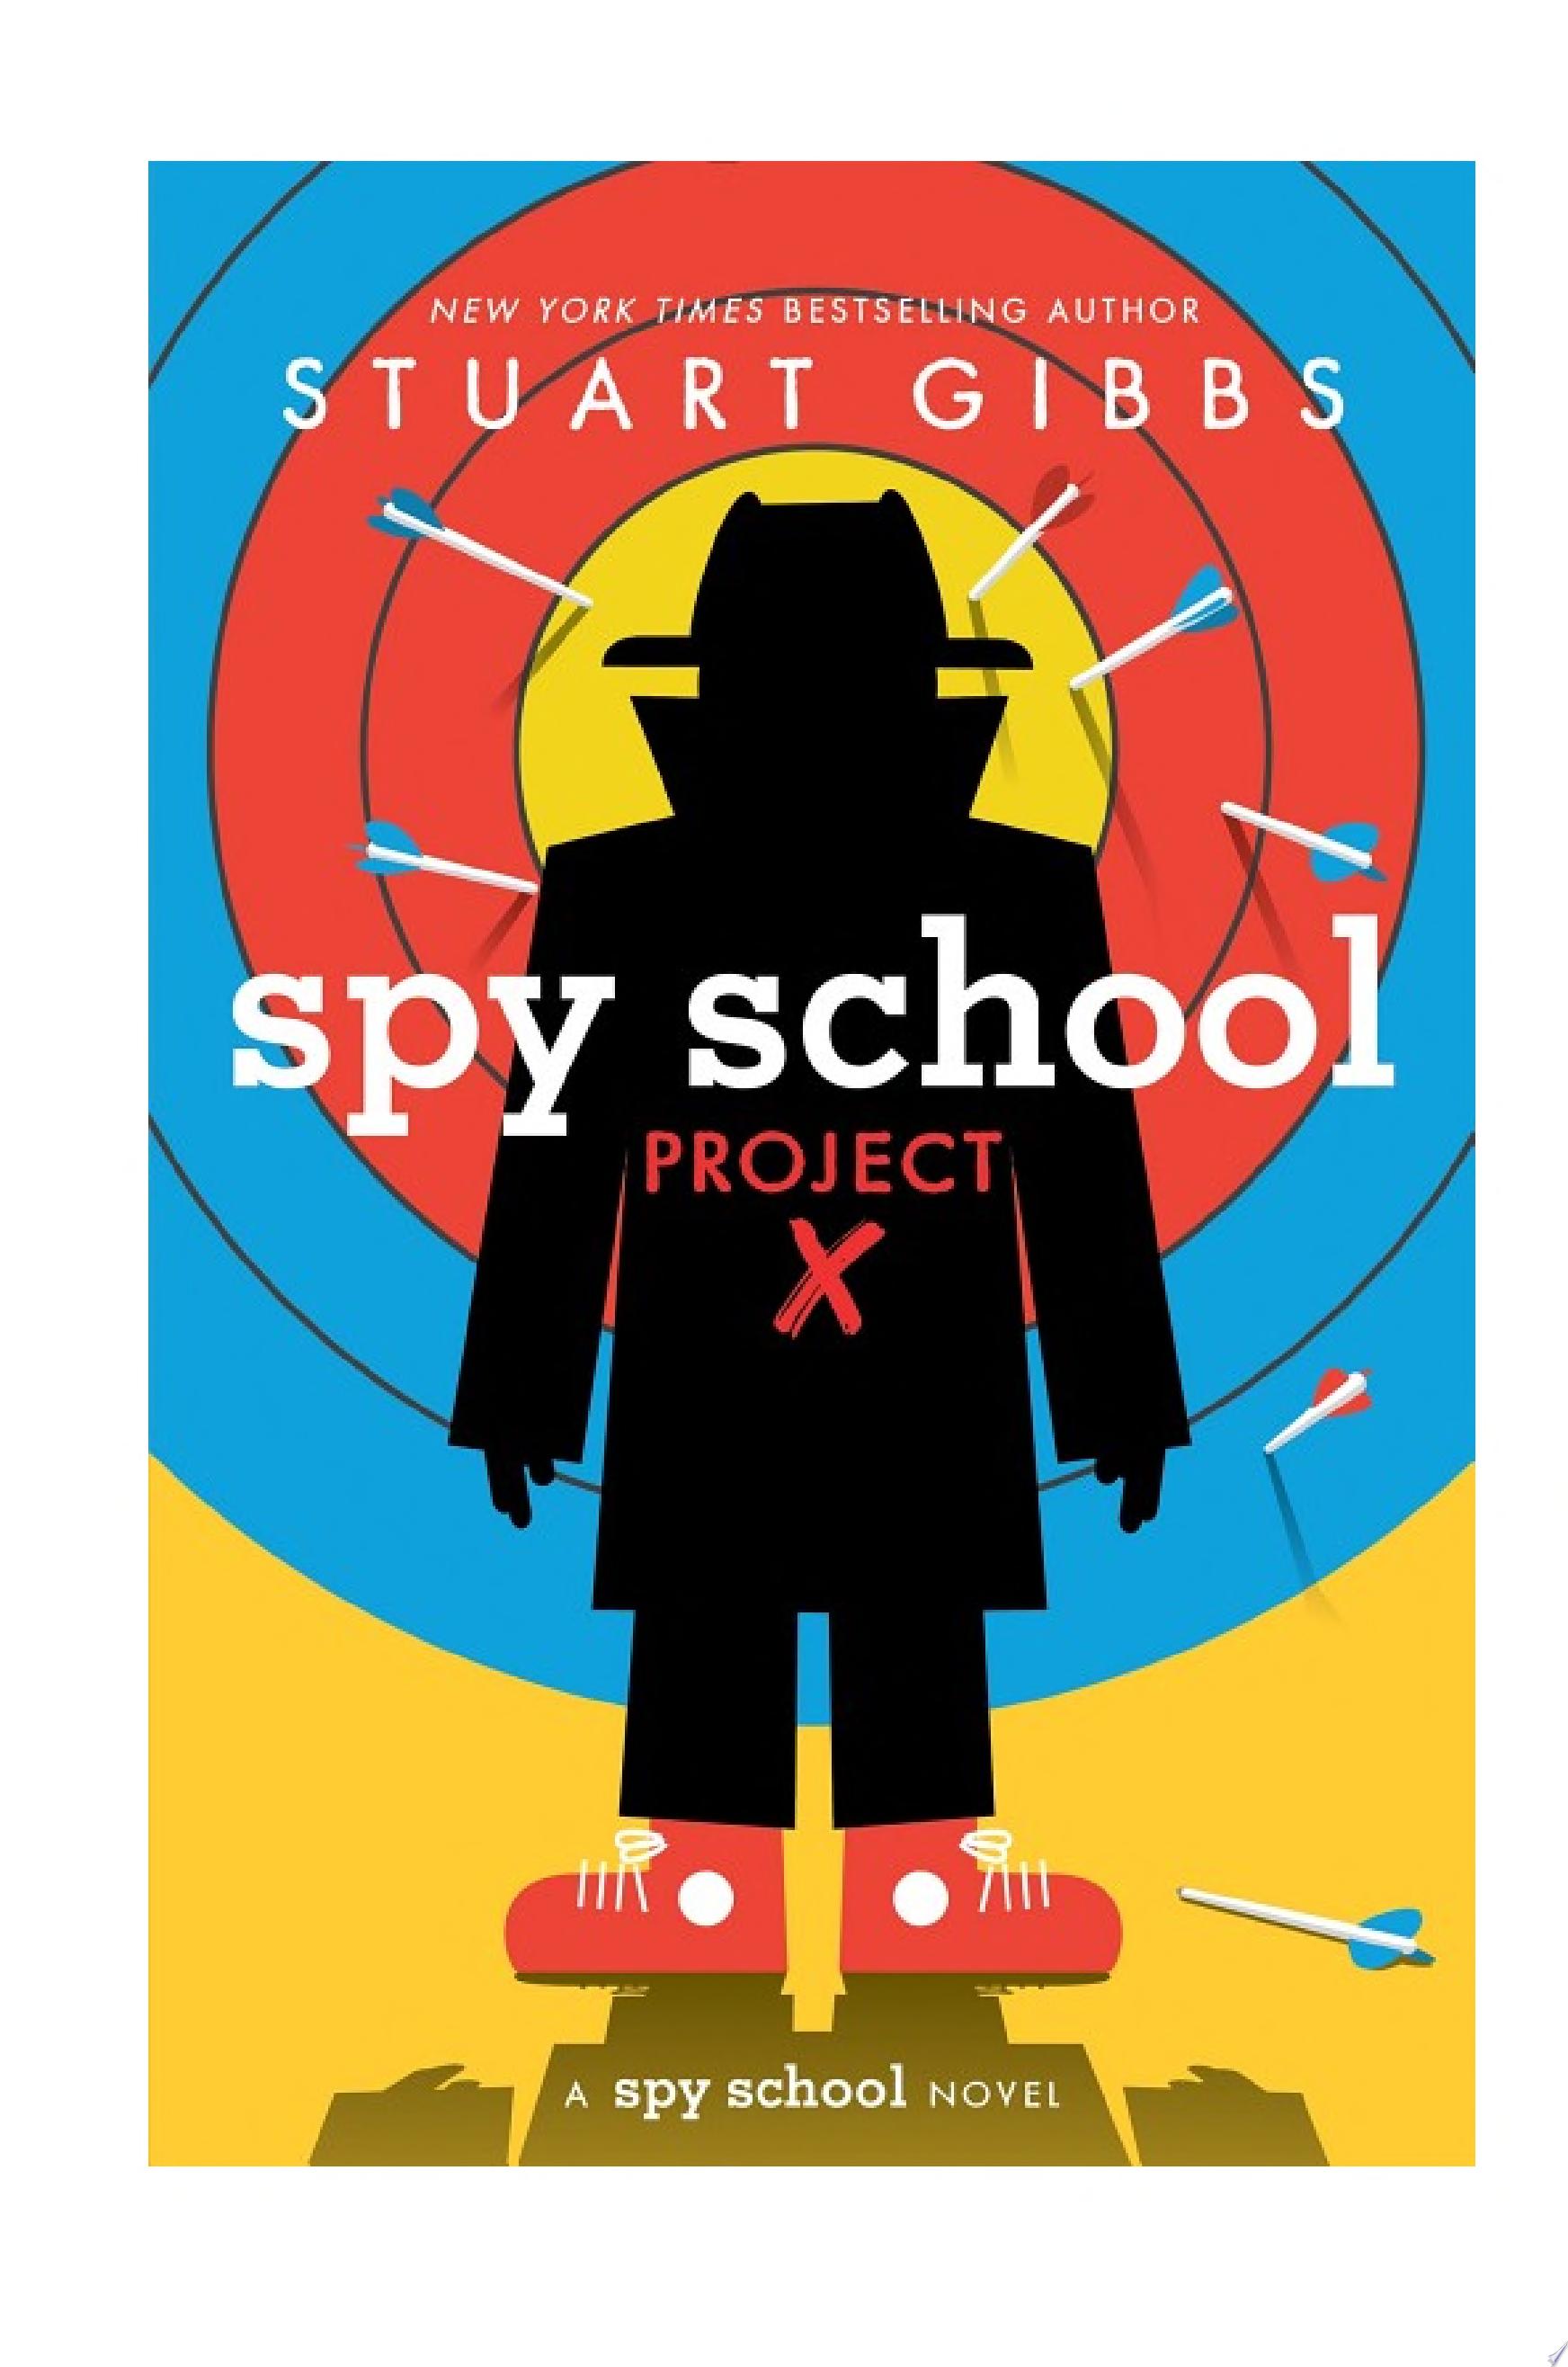 Image for "Spy School Project X"